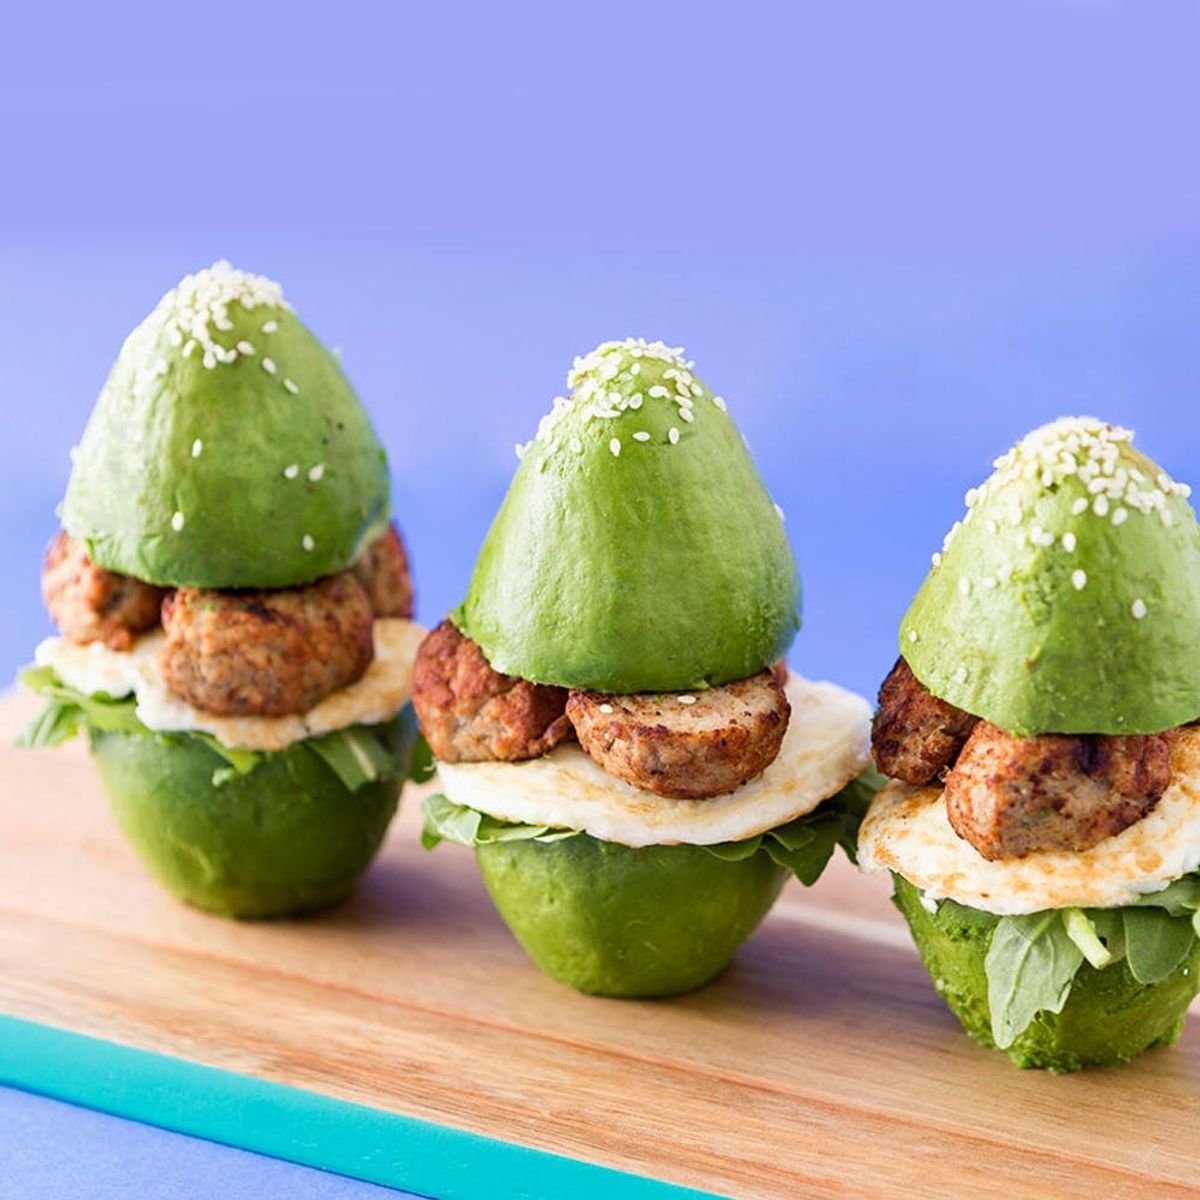 We Tried It: Avocado Bun Meatball Sliders With Our Fave Trader Joe’s Products